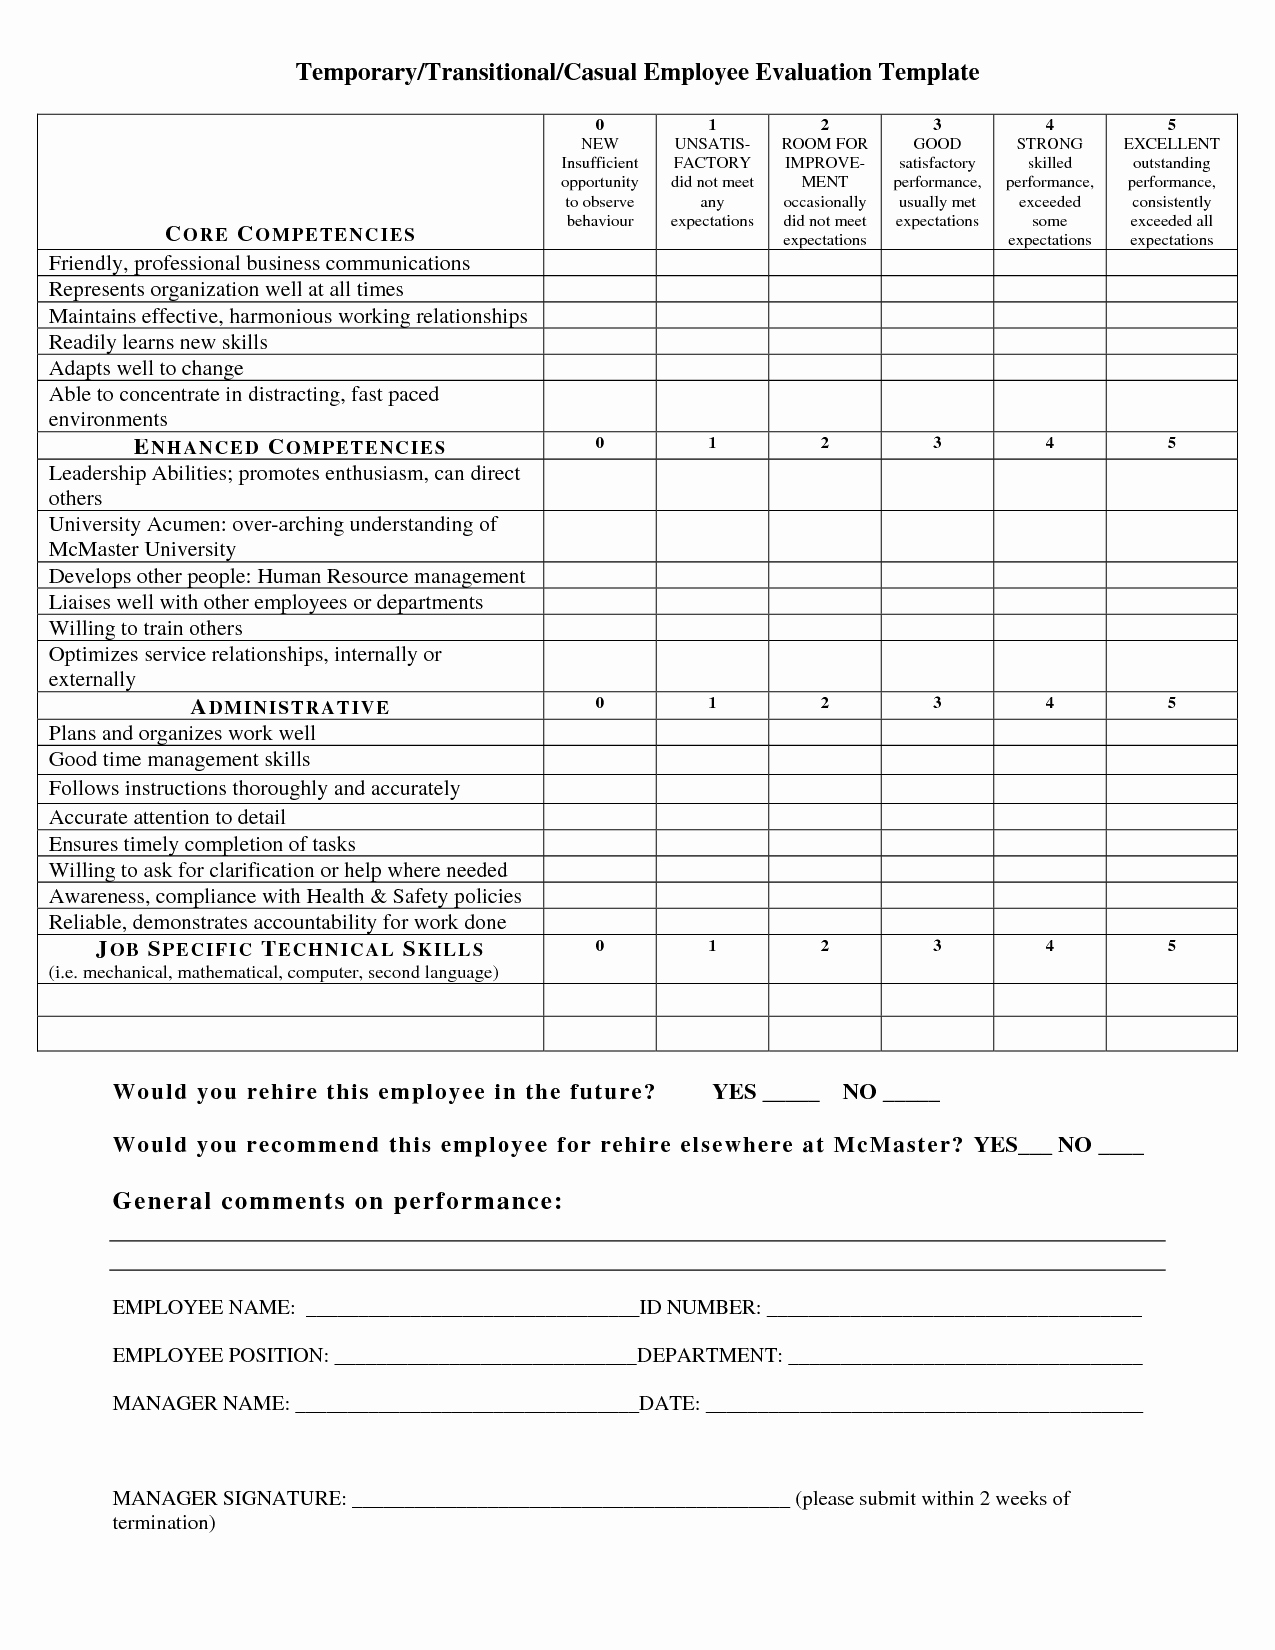 Employee Performance Evaluation Template Awesome Best S Of Template Evaluation Sheet Training